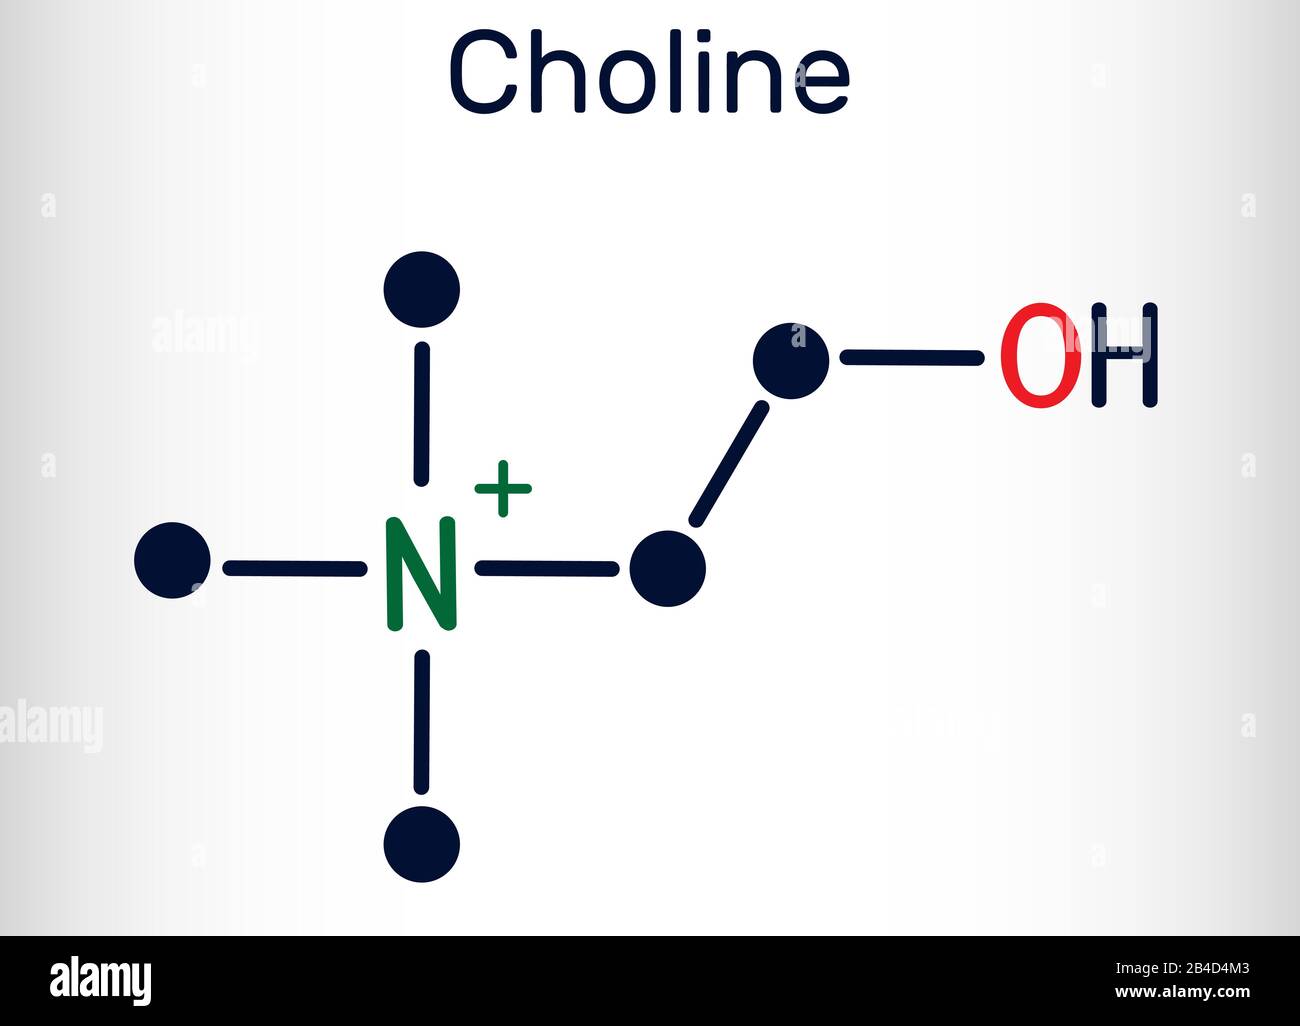 Choline,  C5H14NO+.vitamin-like essential nutrien molecule. It is a constituent of lecithin. Structural chemical formula and molecule model. Vector il Stock Vector